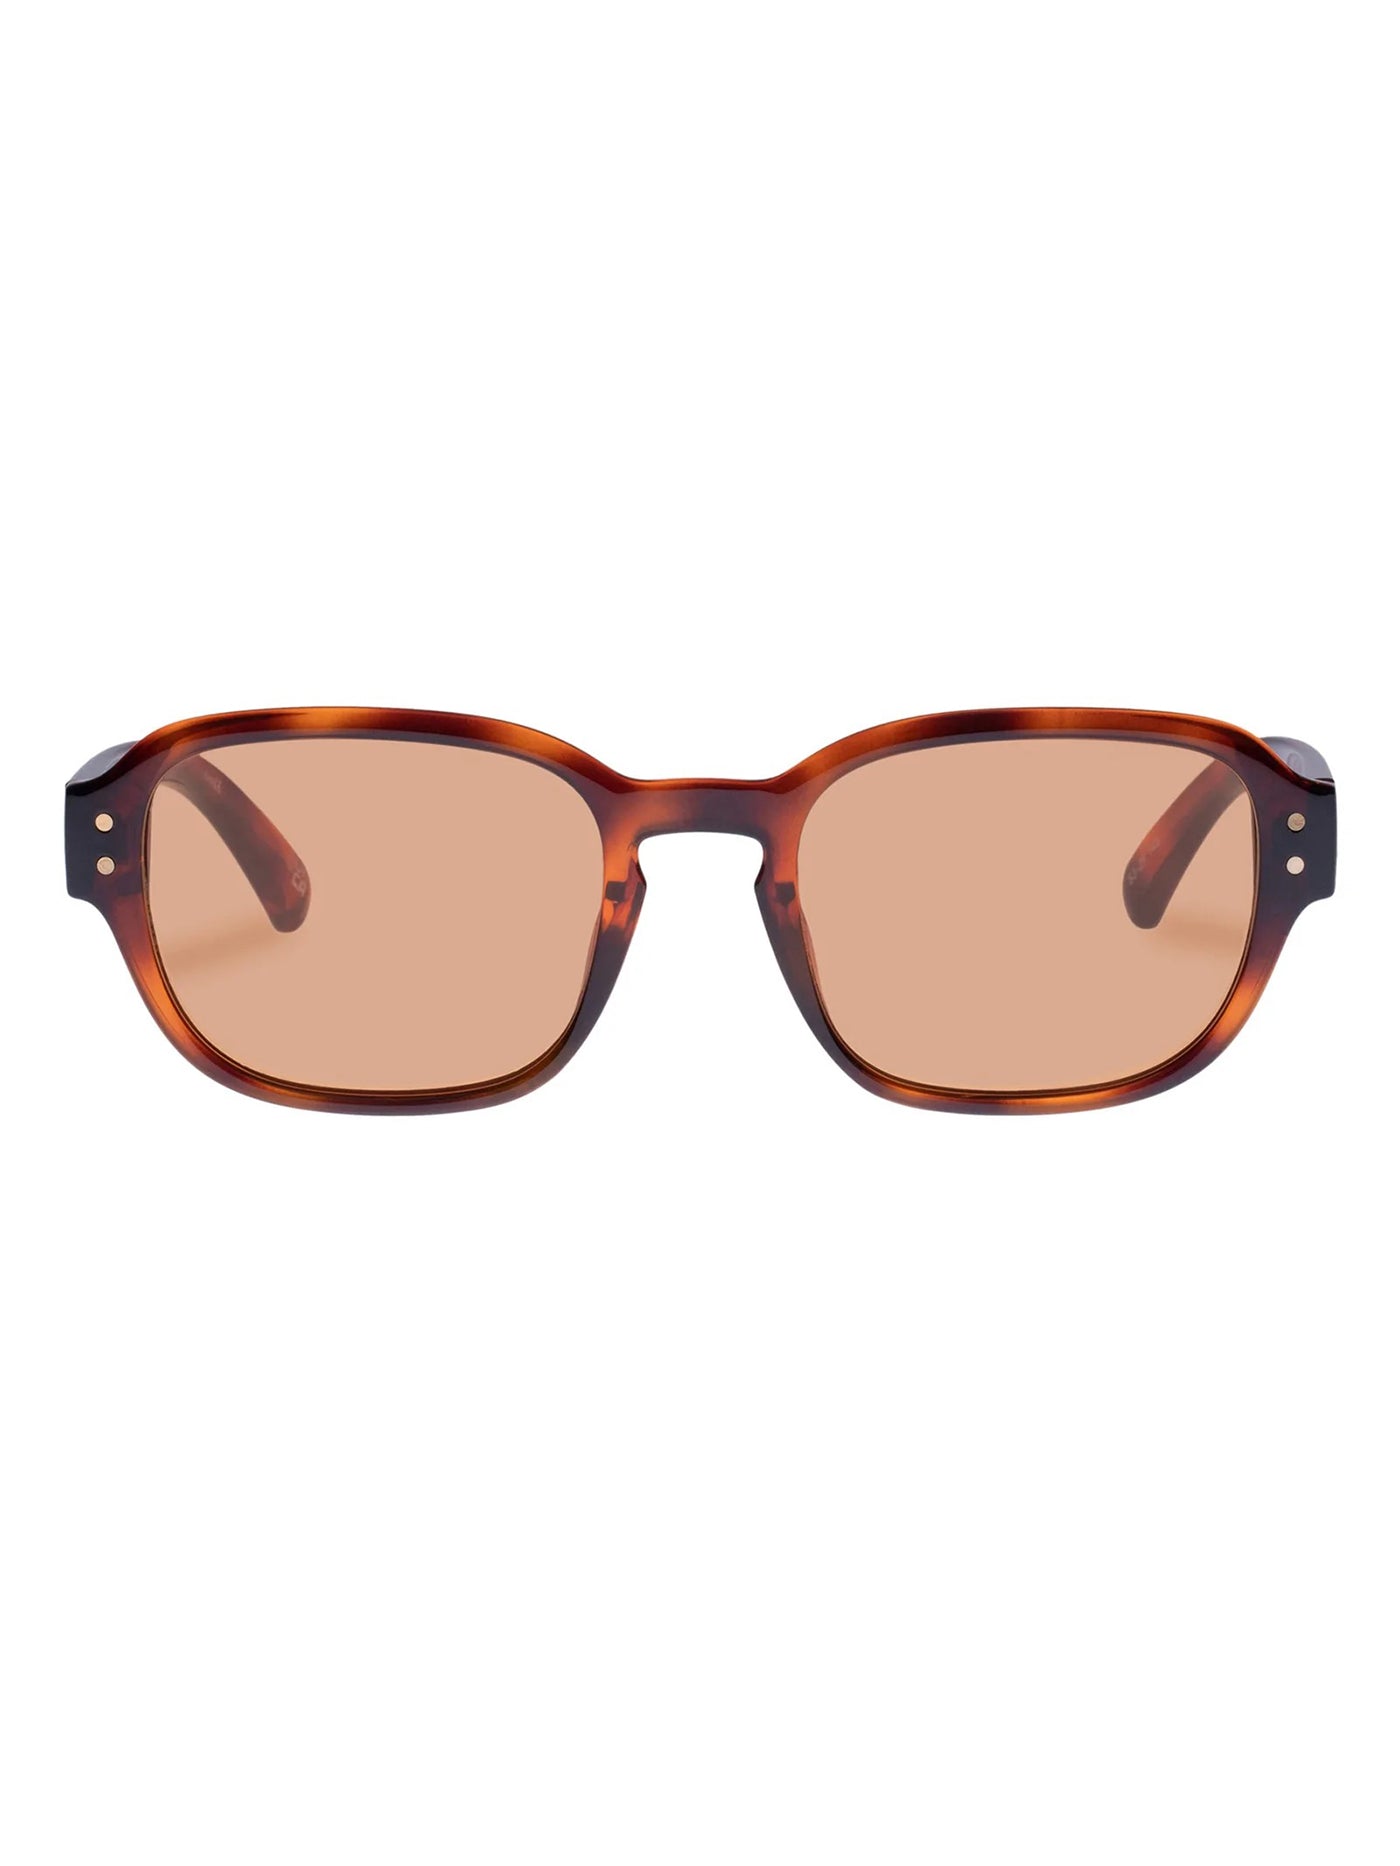 Le Specs Unthinkable Toffee Tort/Amber Tint Sunglasses